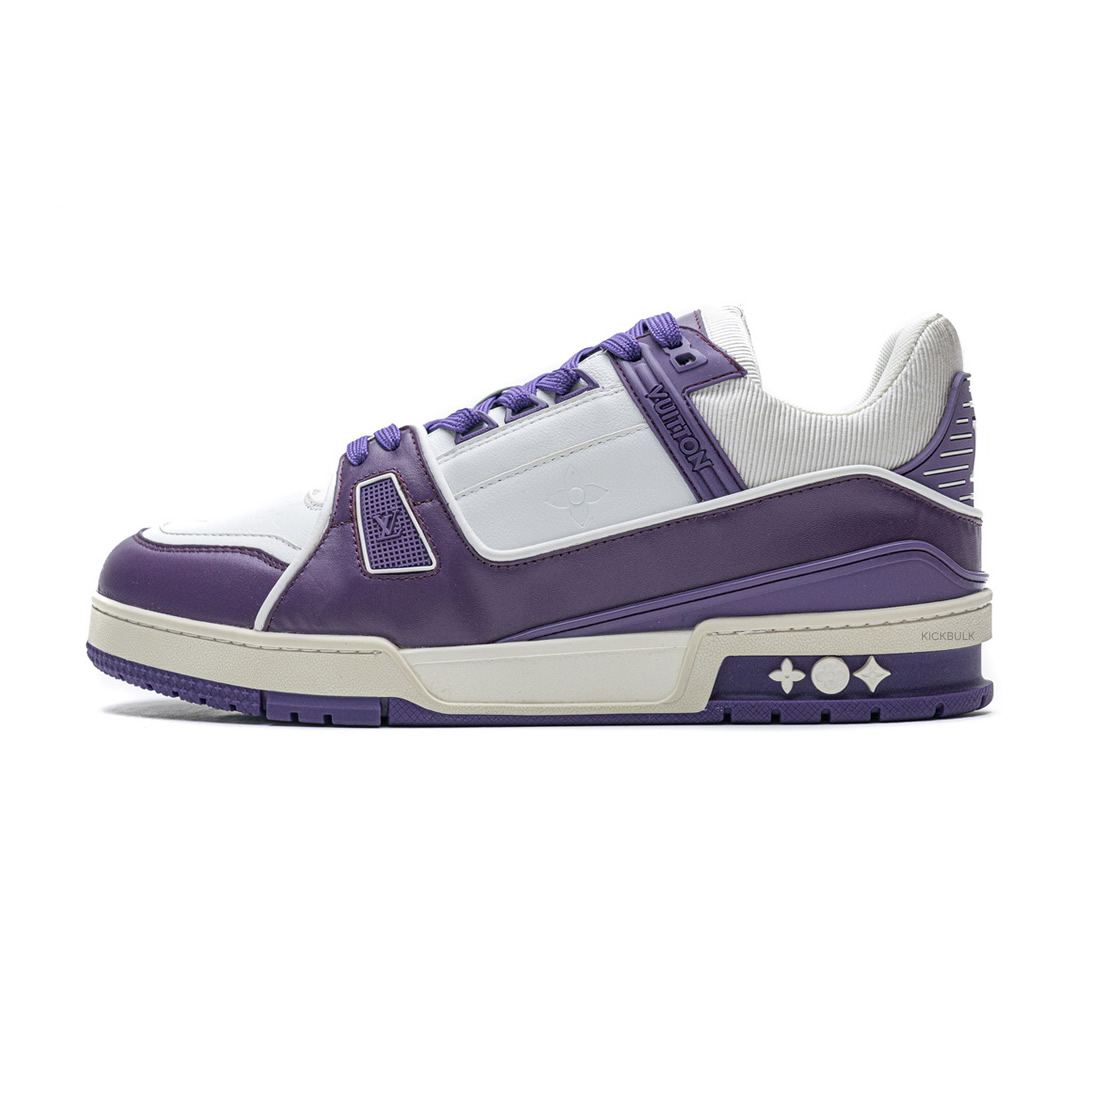 Louis Vuitton 20ss Trainer Purple, Sizes 36-45 from stockxpro.vip